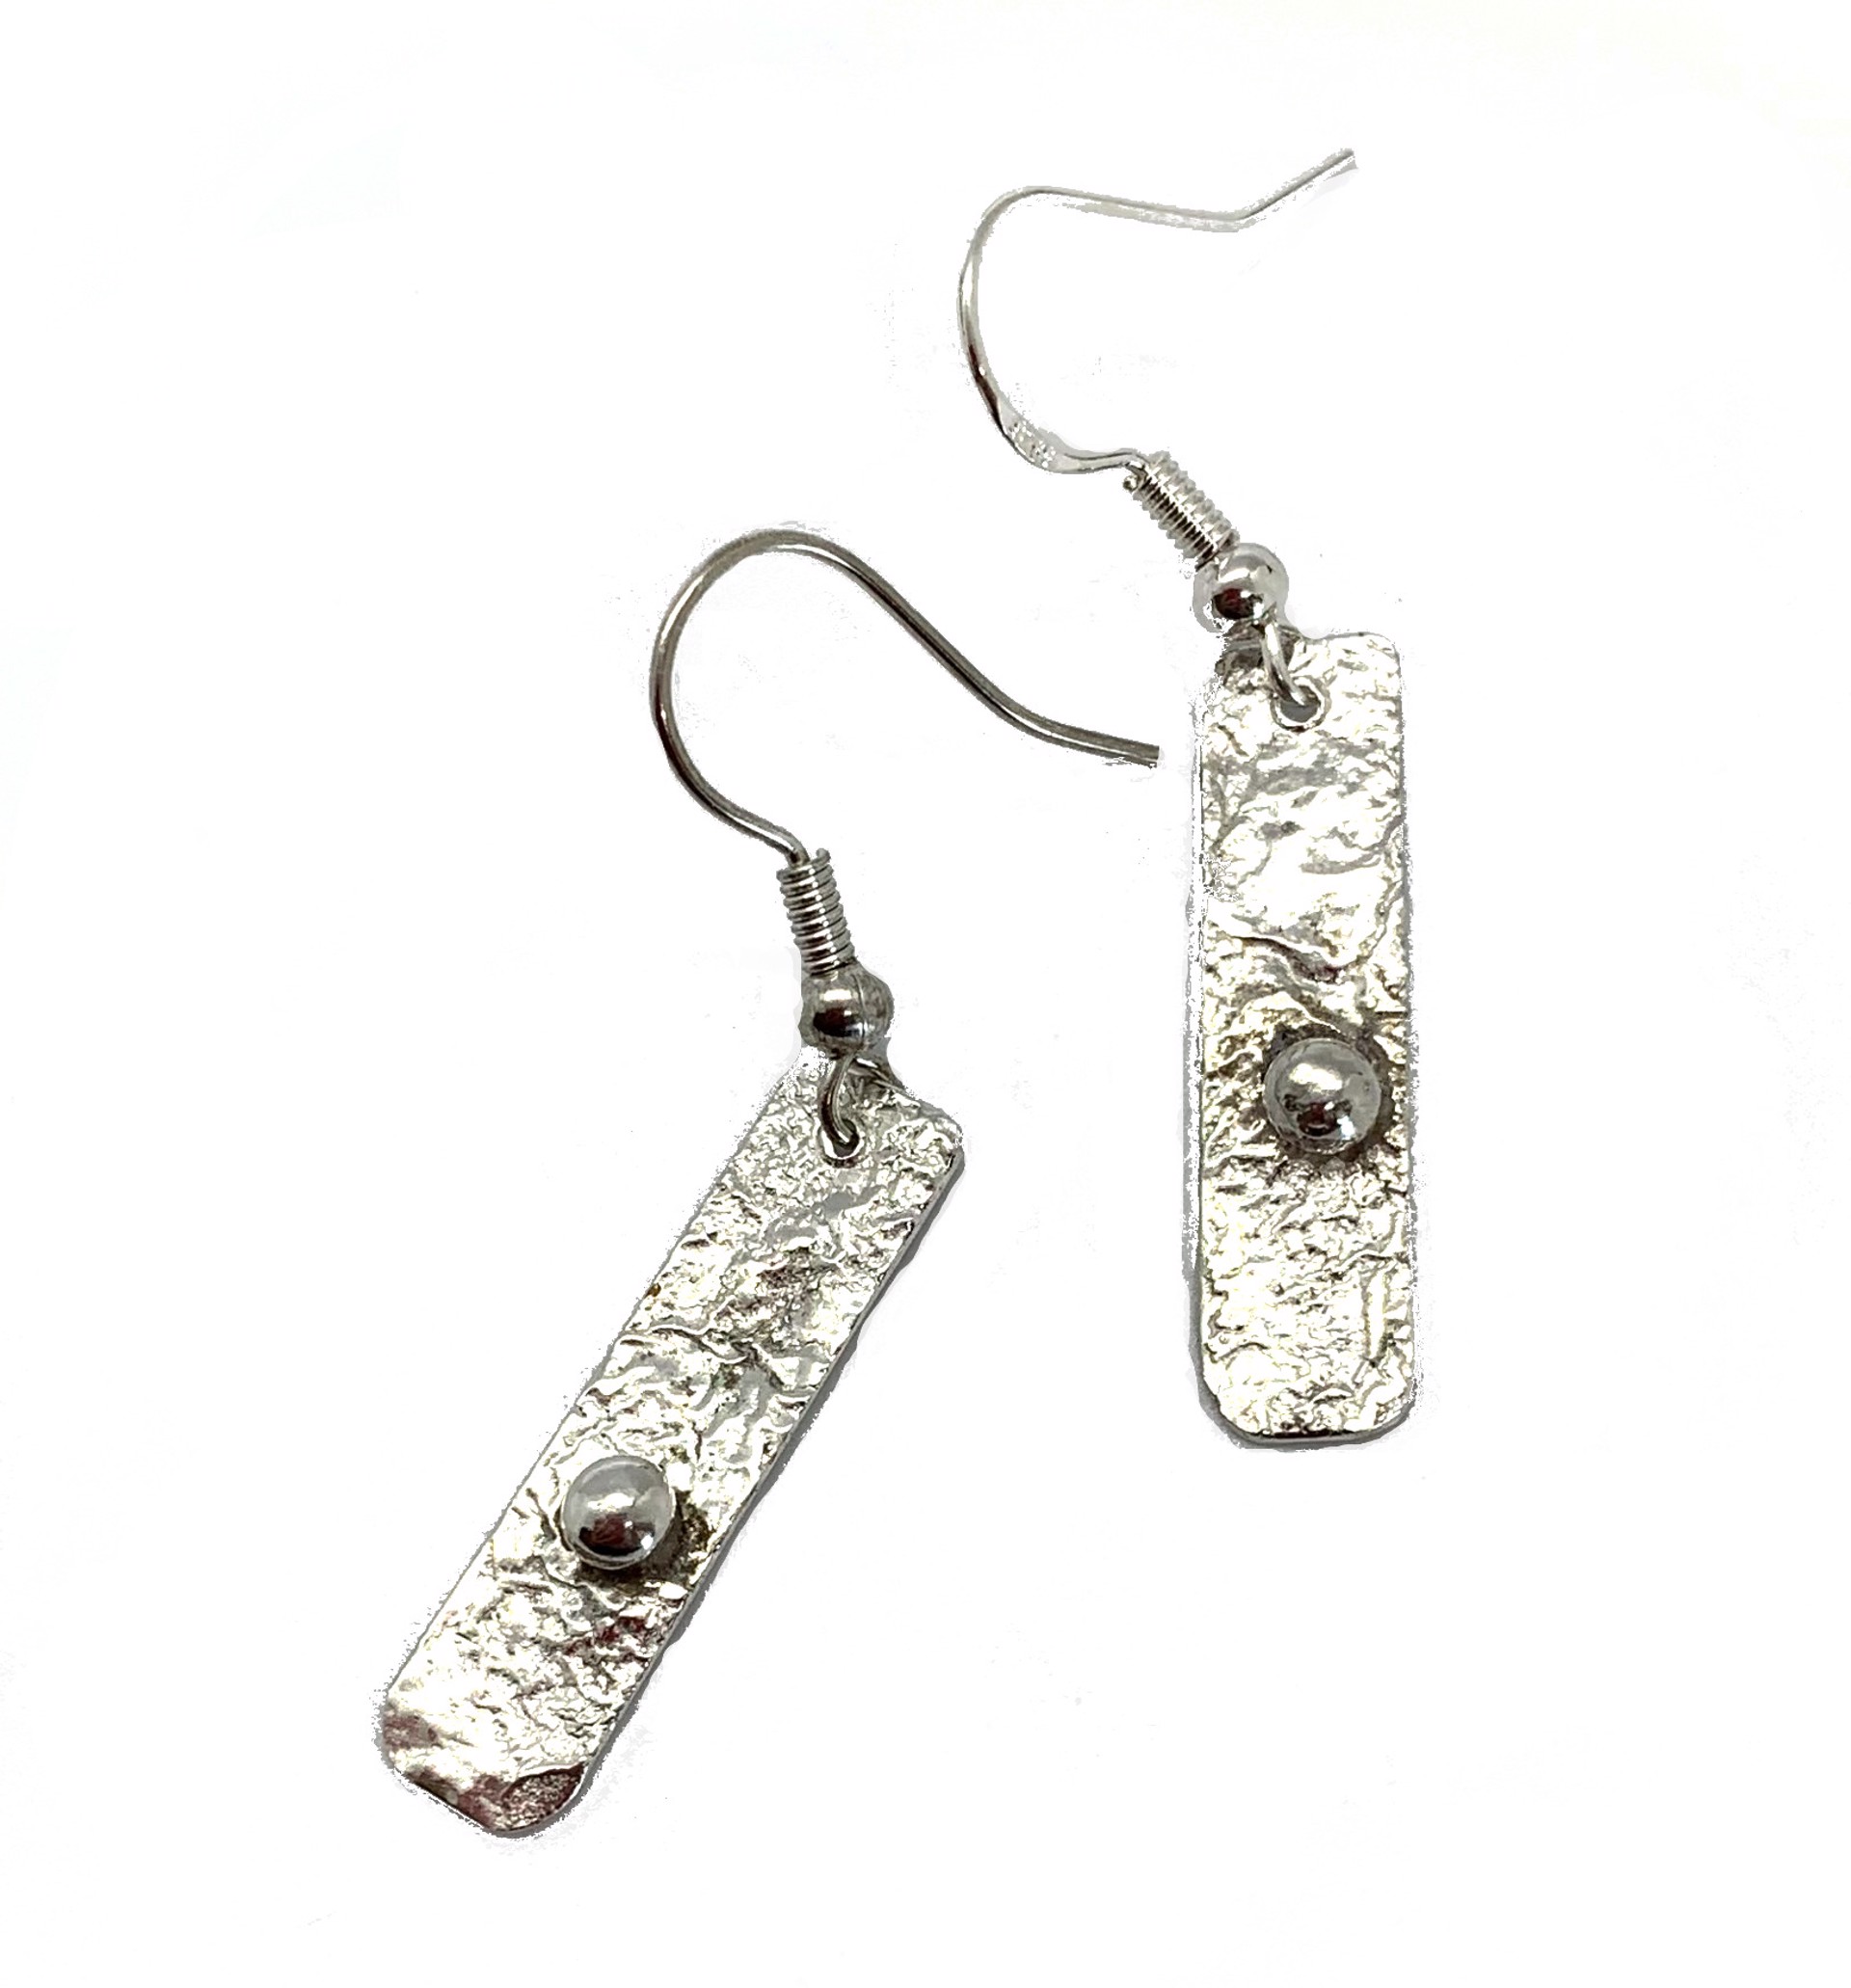 Sterling Silver Narrow Reticulated Rectangular Earrings with Bead by Leslie Eggers